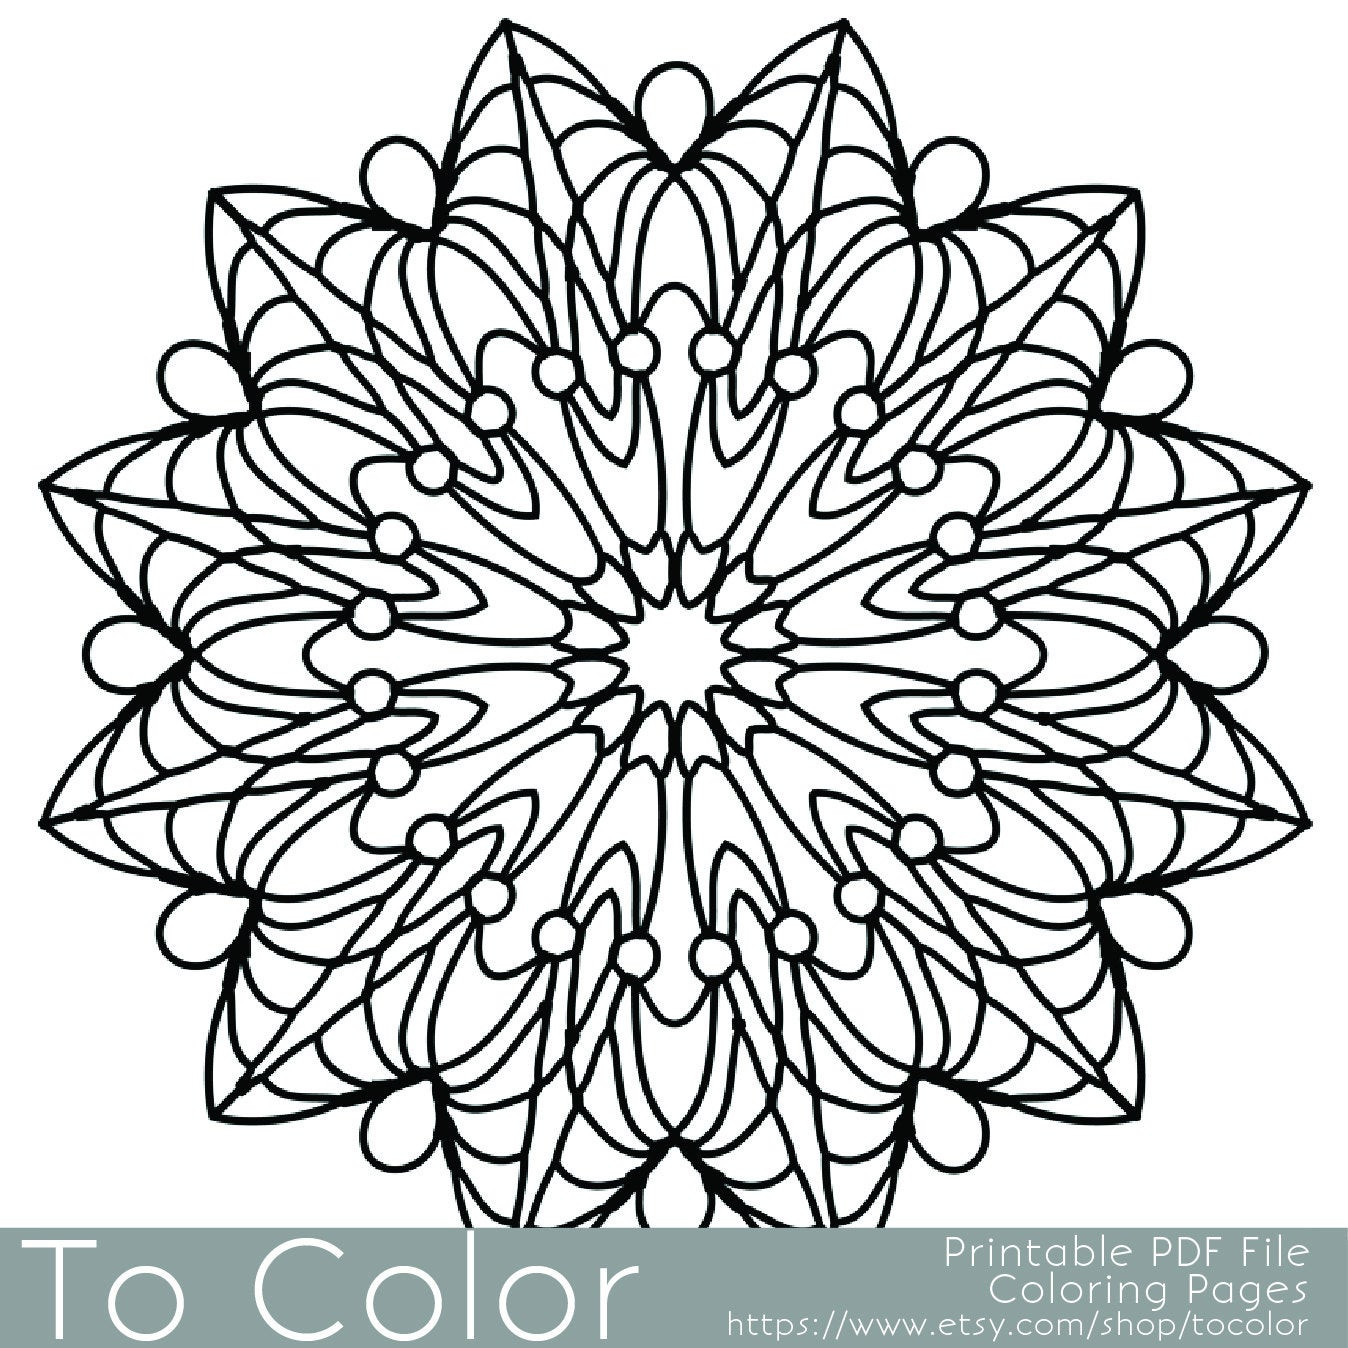 Easy Printable Coloring Pages
 Simple Printable Coloring Pages for Adults Gel Pens Mandala